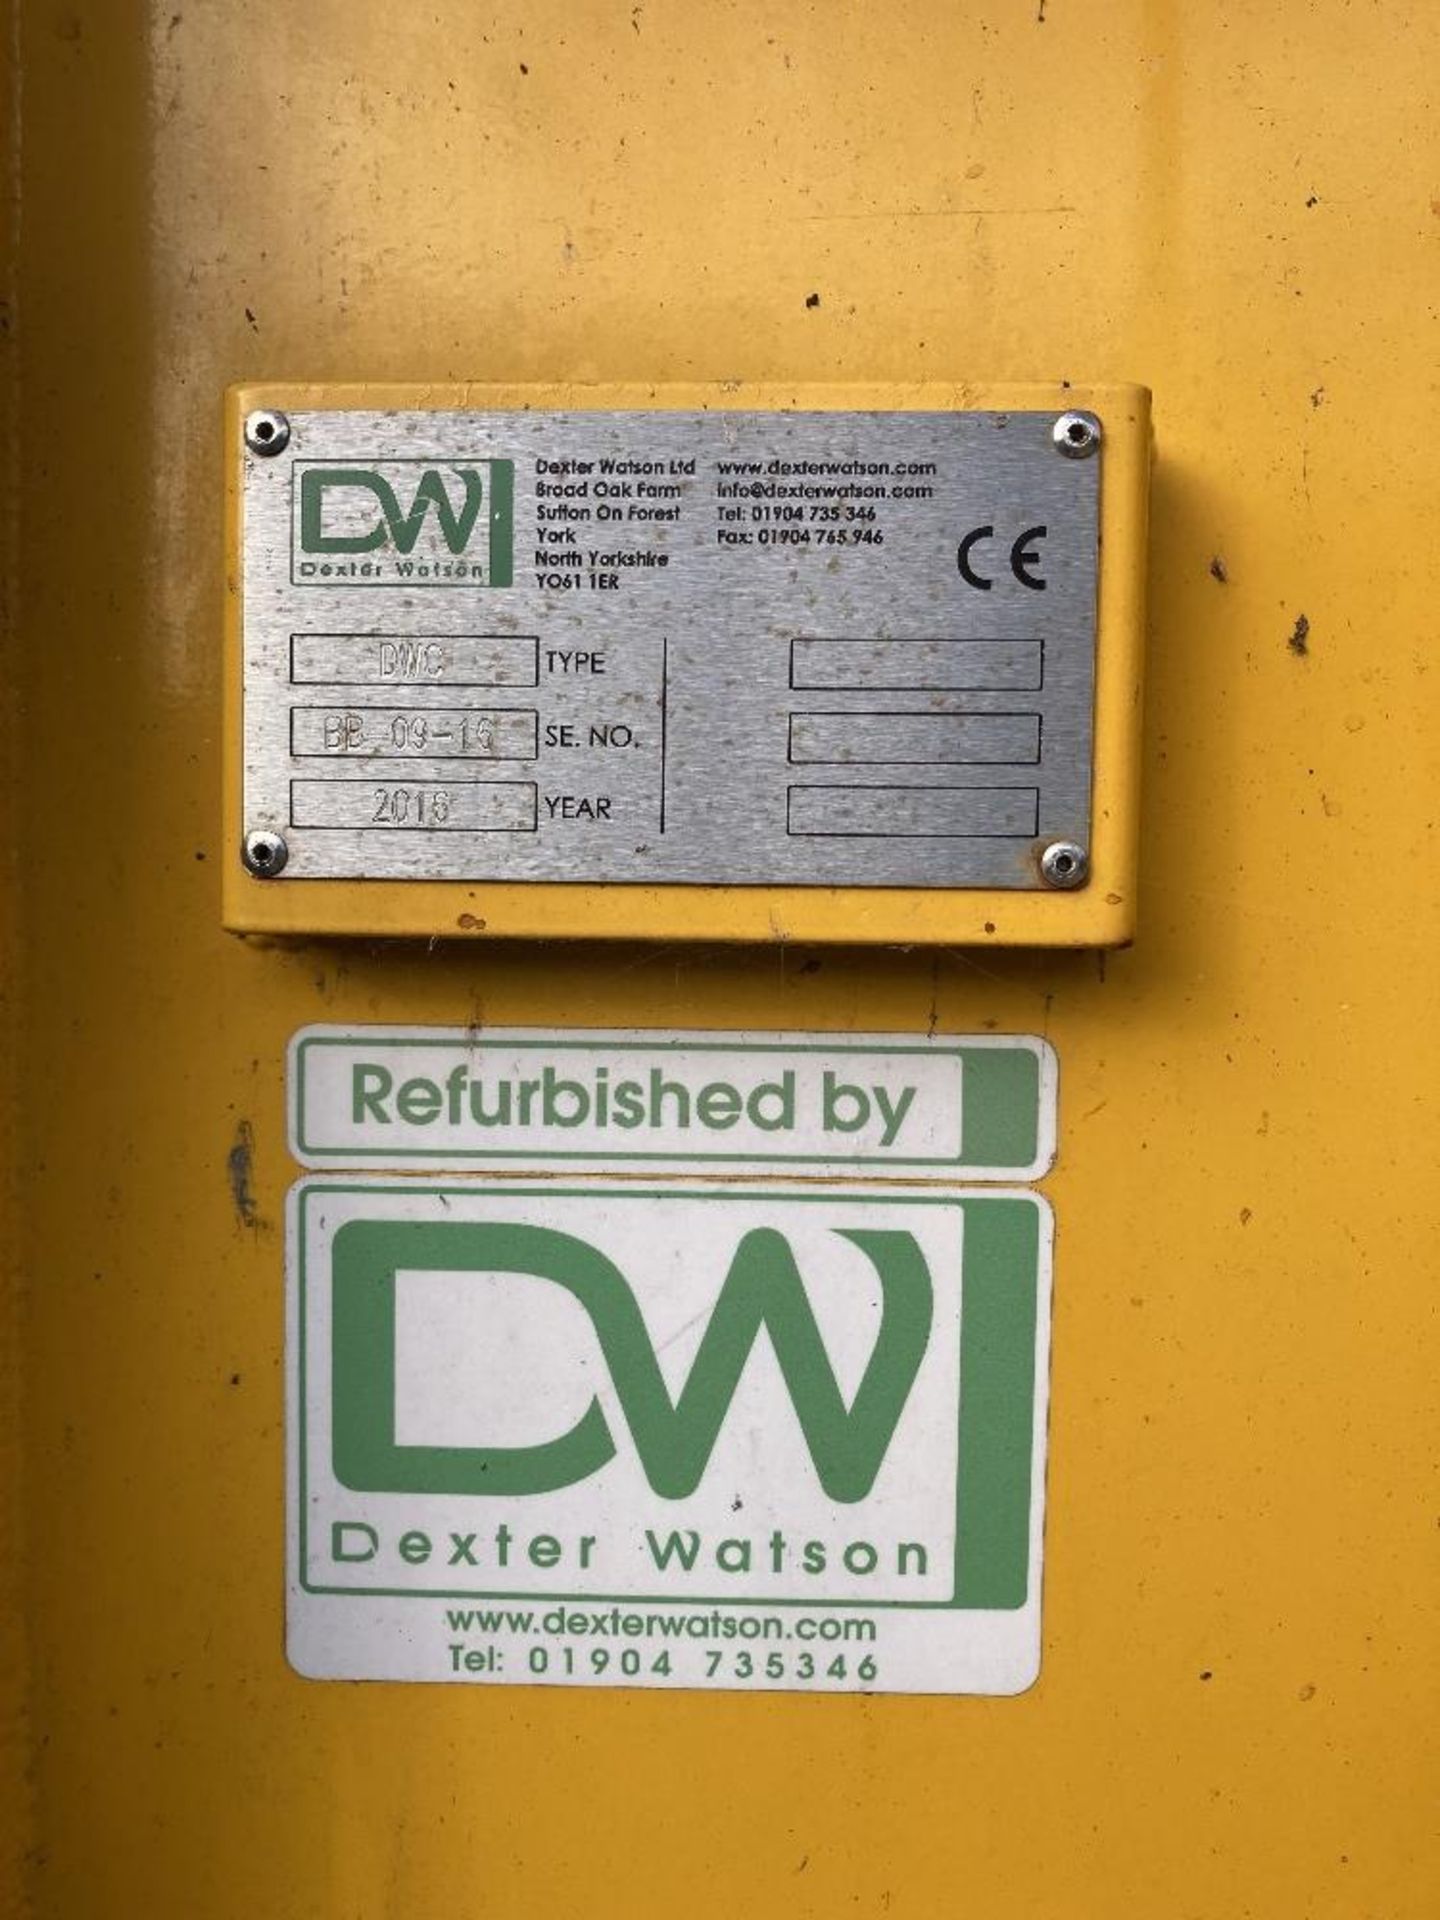 Dexter Watson DWC Dewatering Container - Image 6 of 6